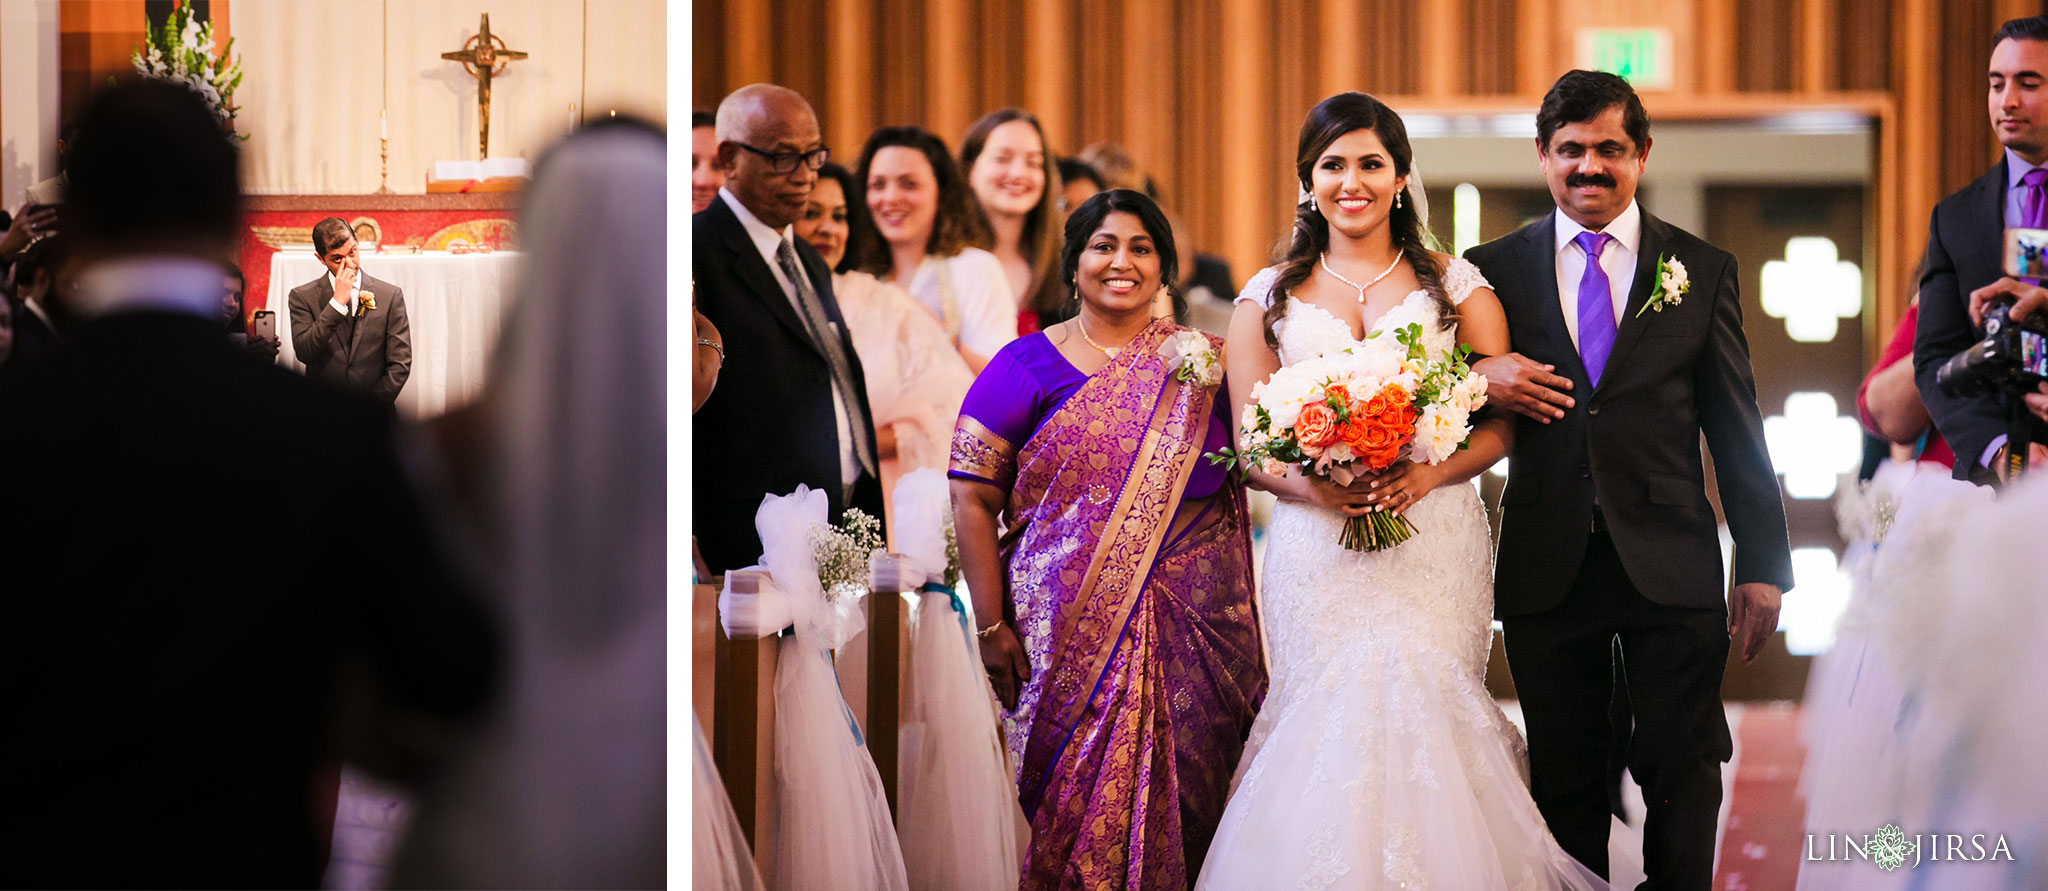 20 claremont united church of christ indian wedding photography